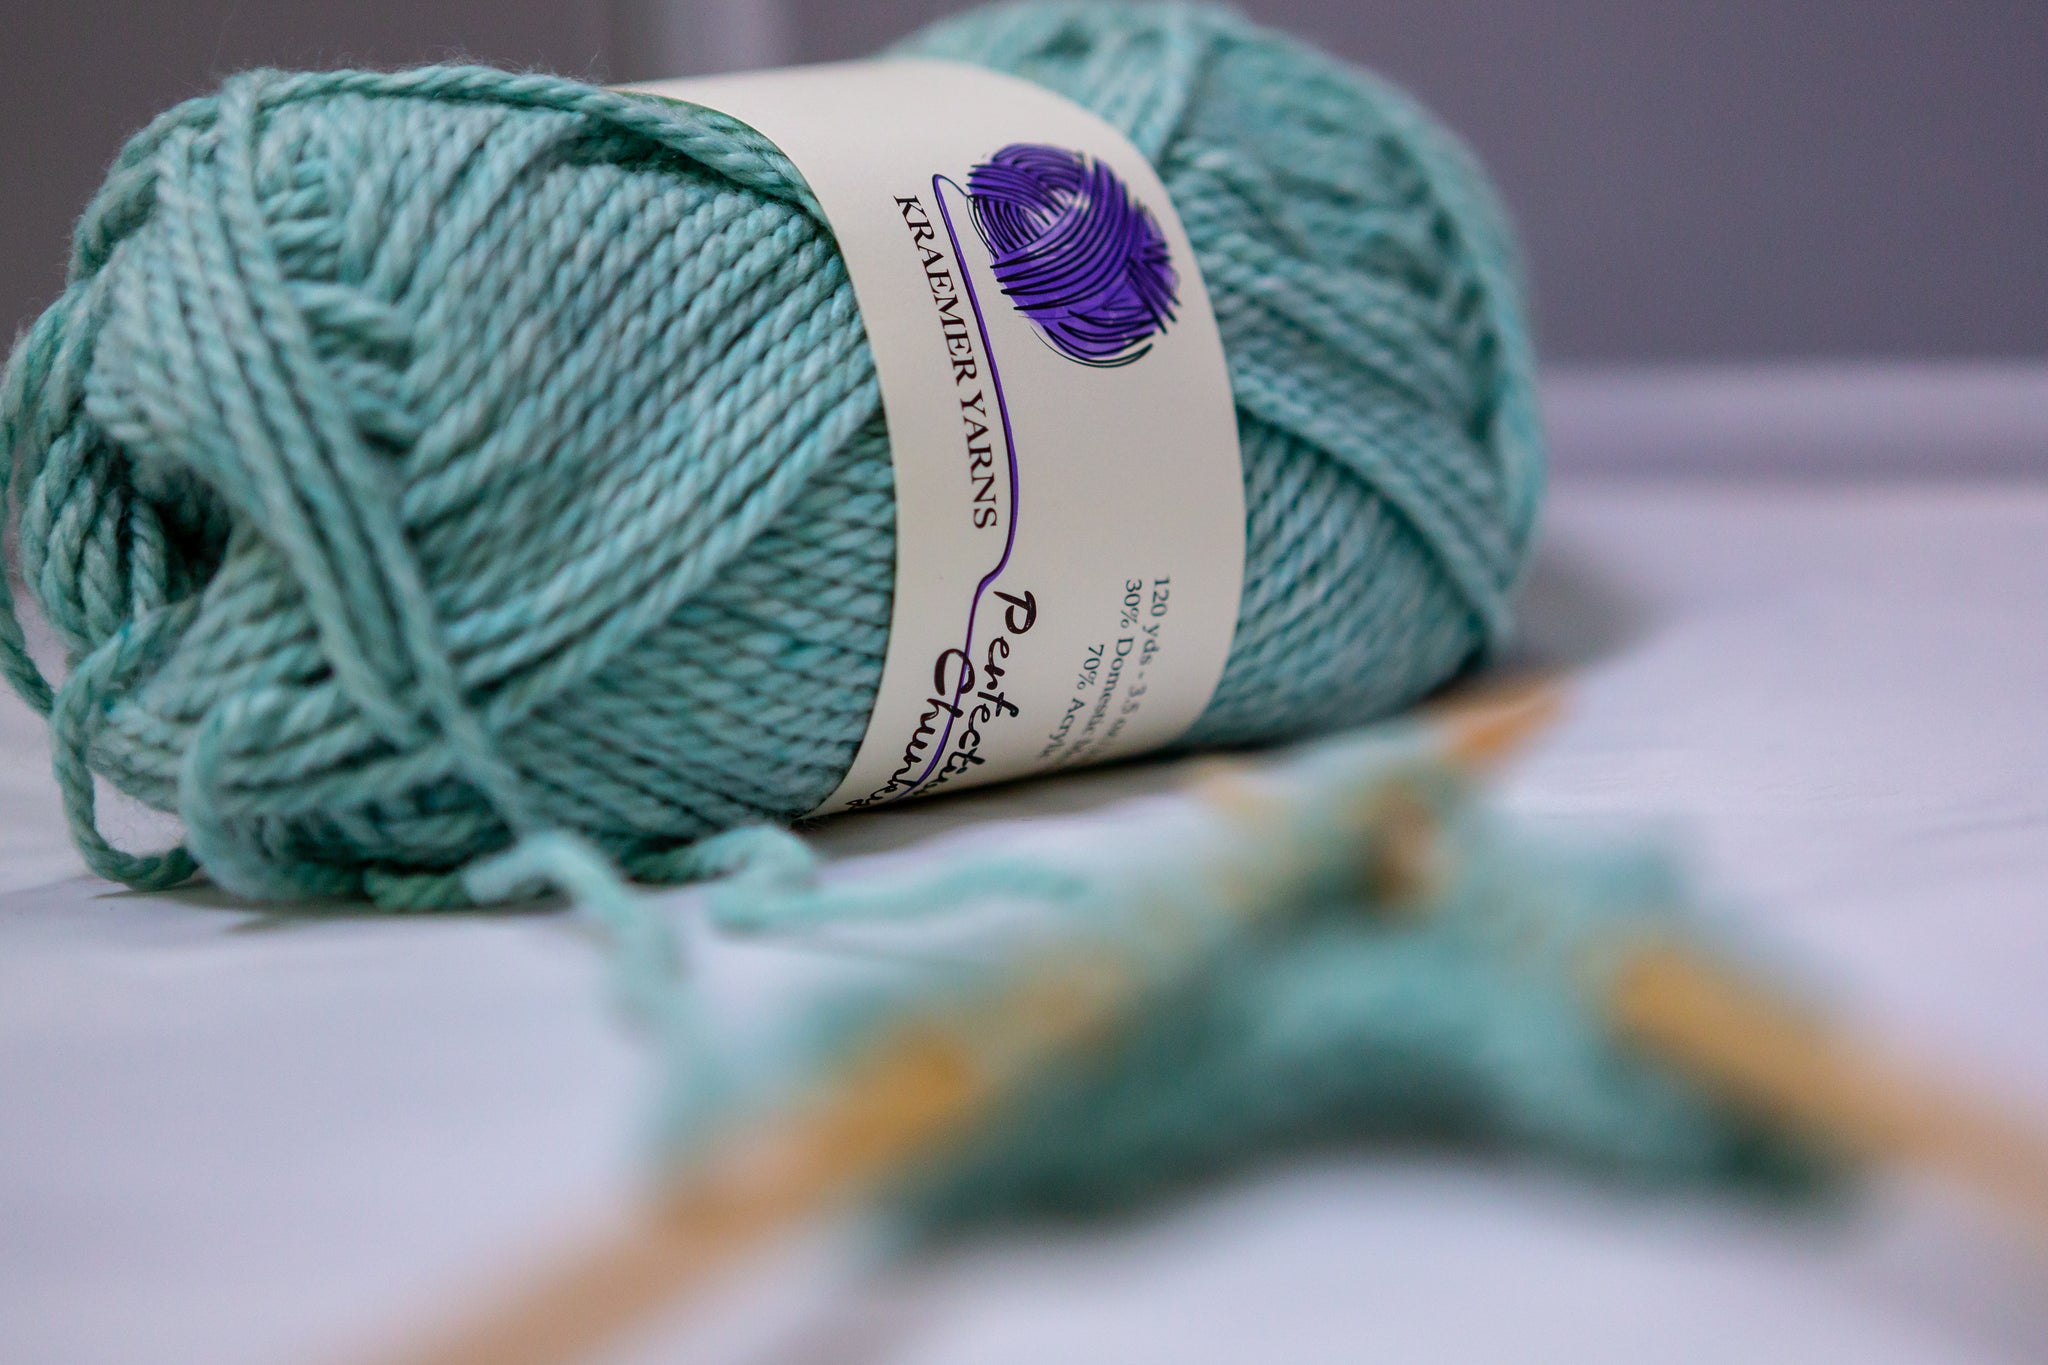 Perfection Yarn is the Perfect Choice for Your Next Project